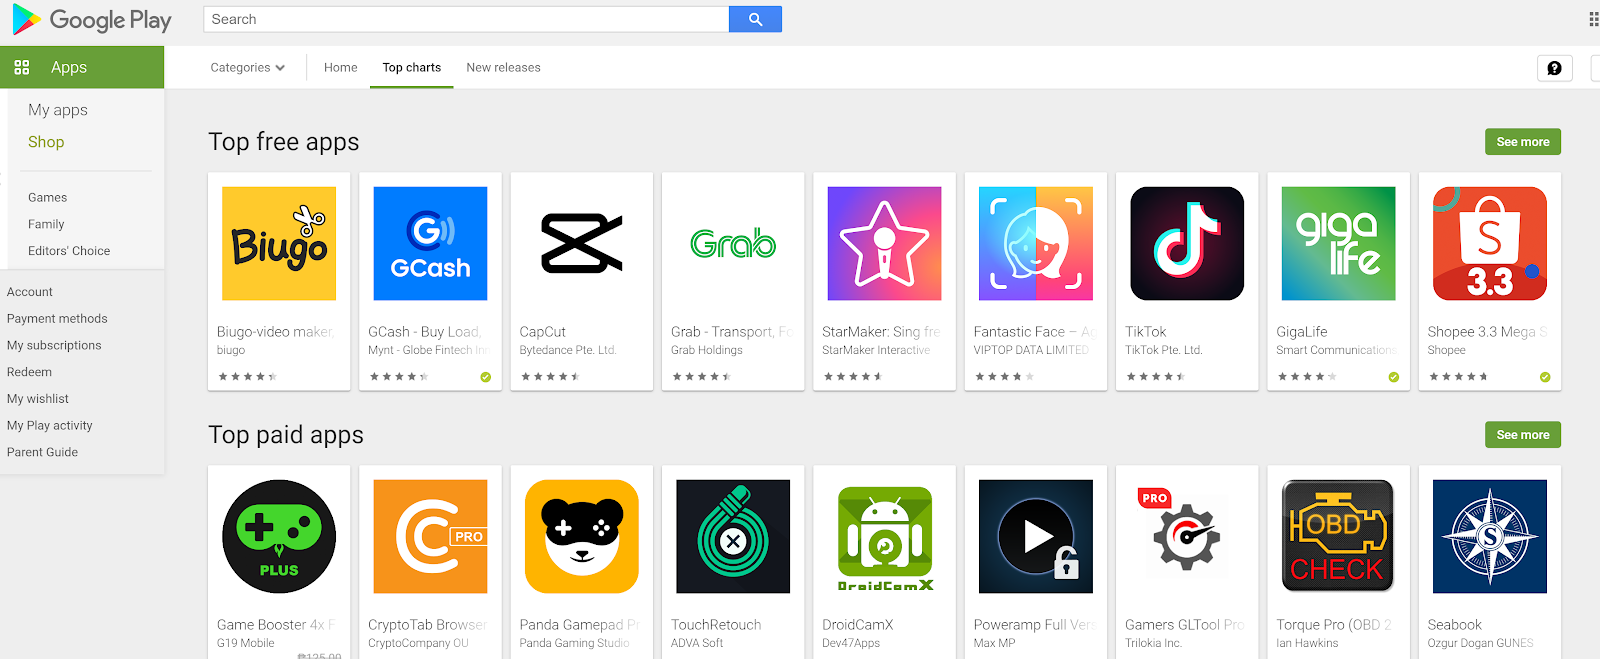 Image of Google Play Store and the featured apps that may lead to app downloads are dropping.